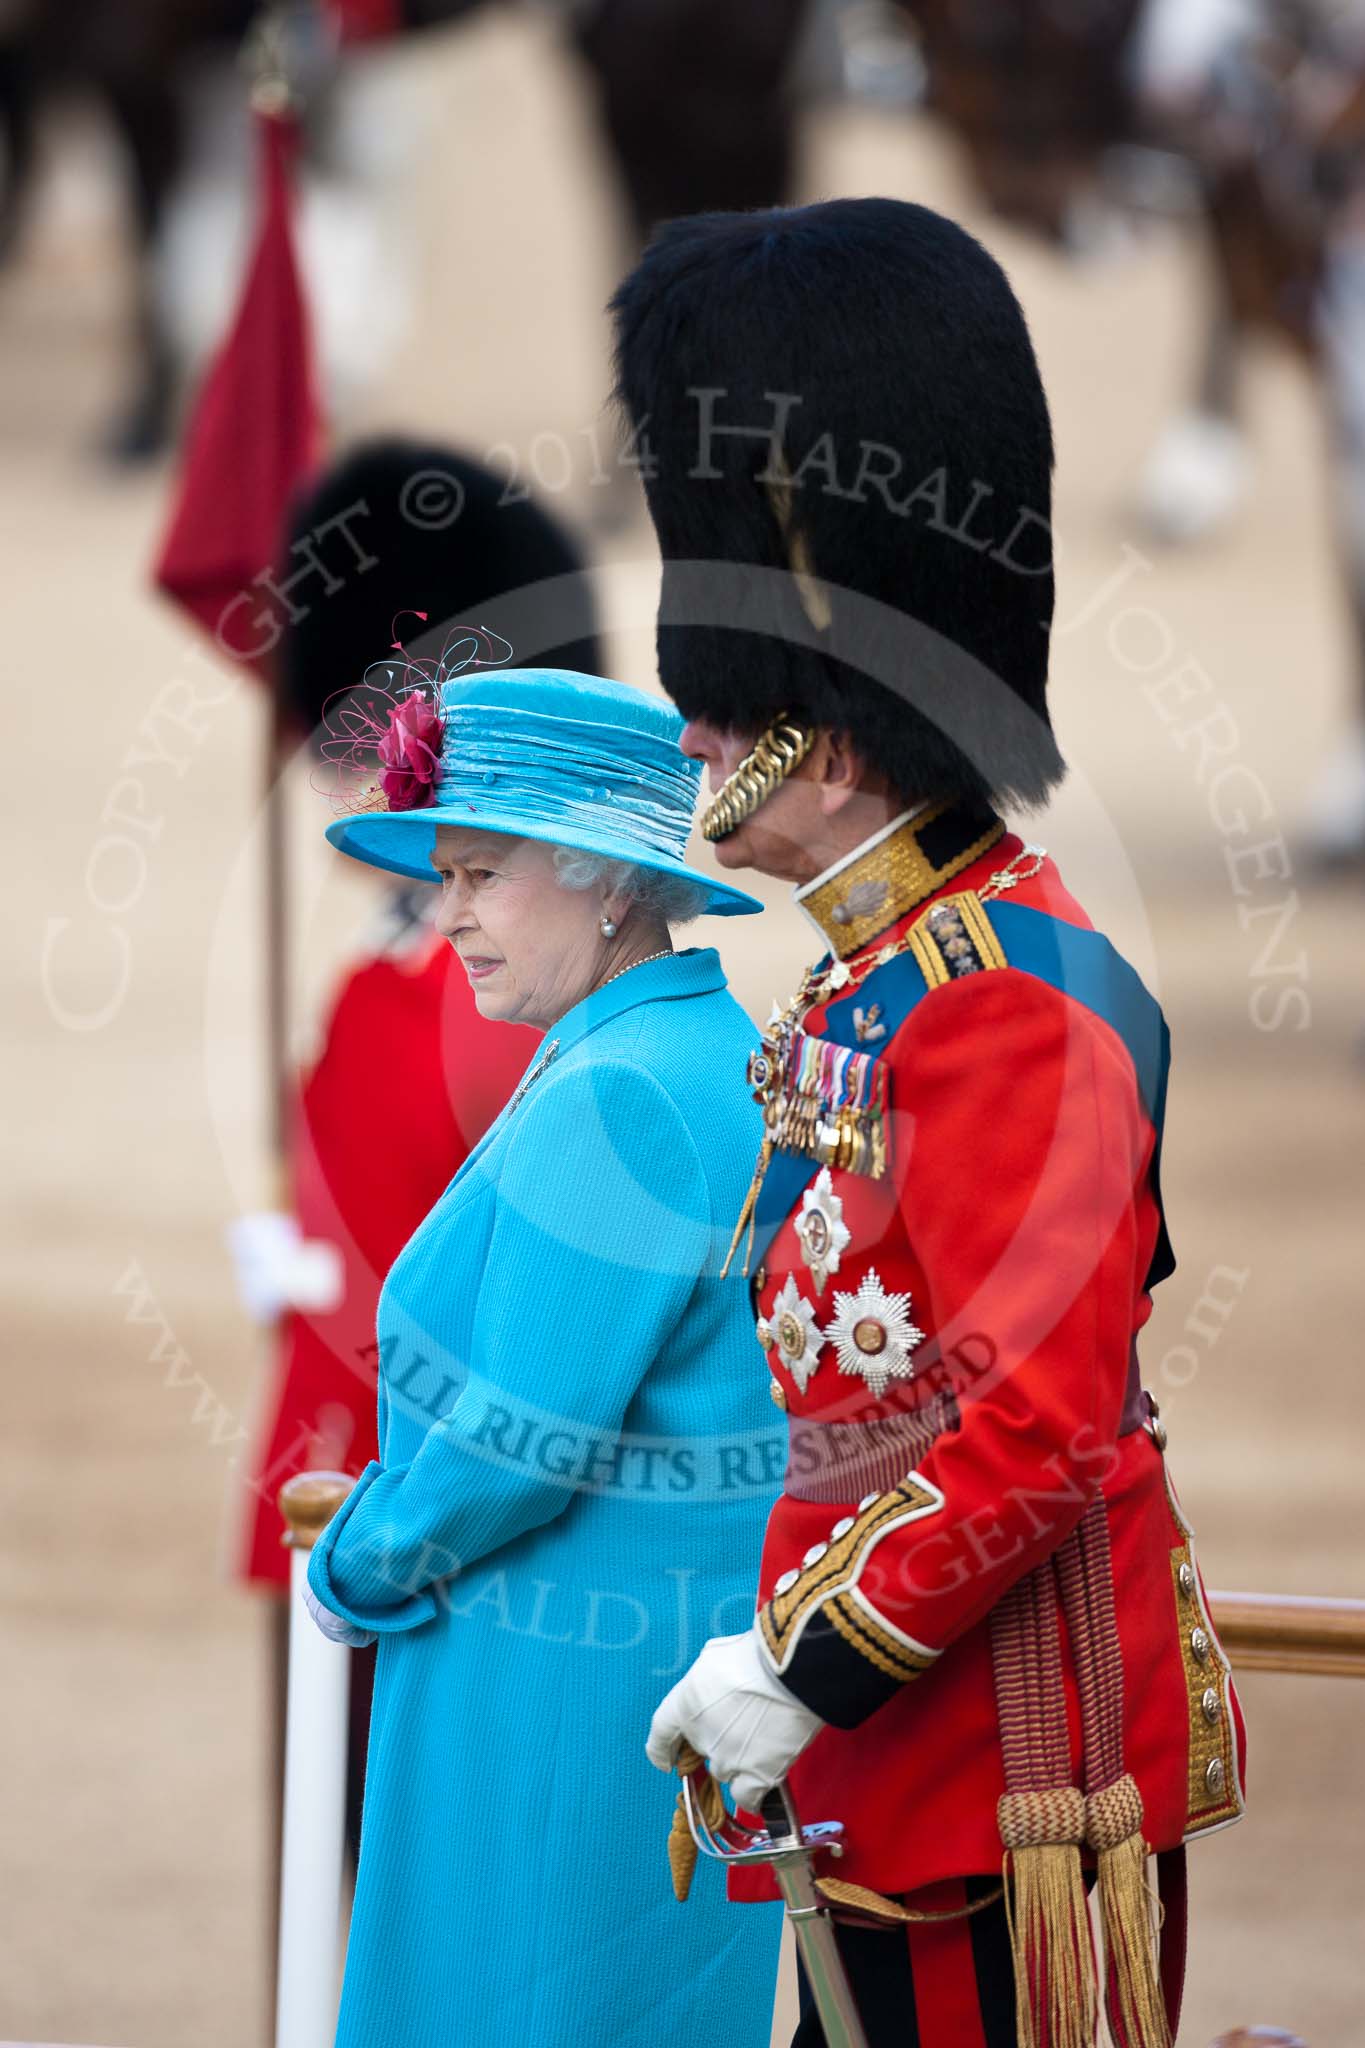 Trooping the Colour 2009: HM The Queen and HRH Prince Philip, The Duke of Edinburgh, standing on the saluting base whilst the National Anthem is played..
Horse Guards Parade, Westminster,
London SW1,

United Kingdom,
on 13 June 2009 at 10:58, image #127